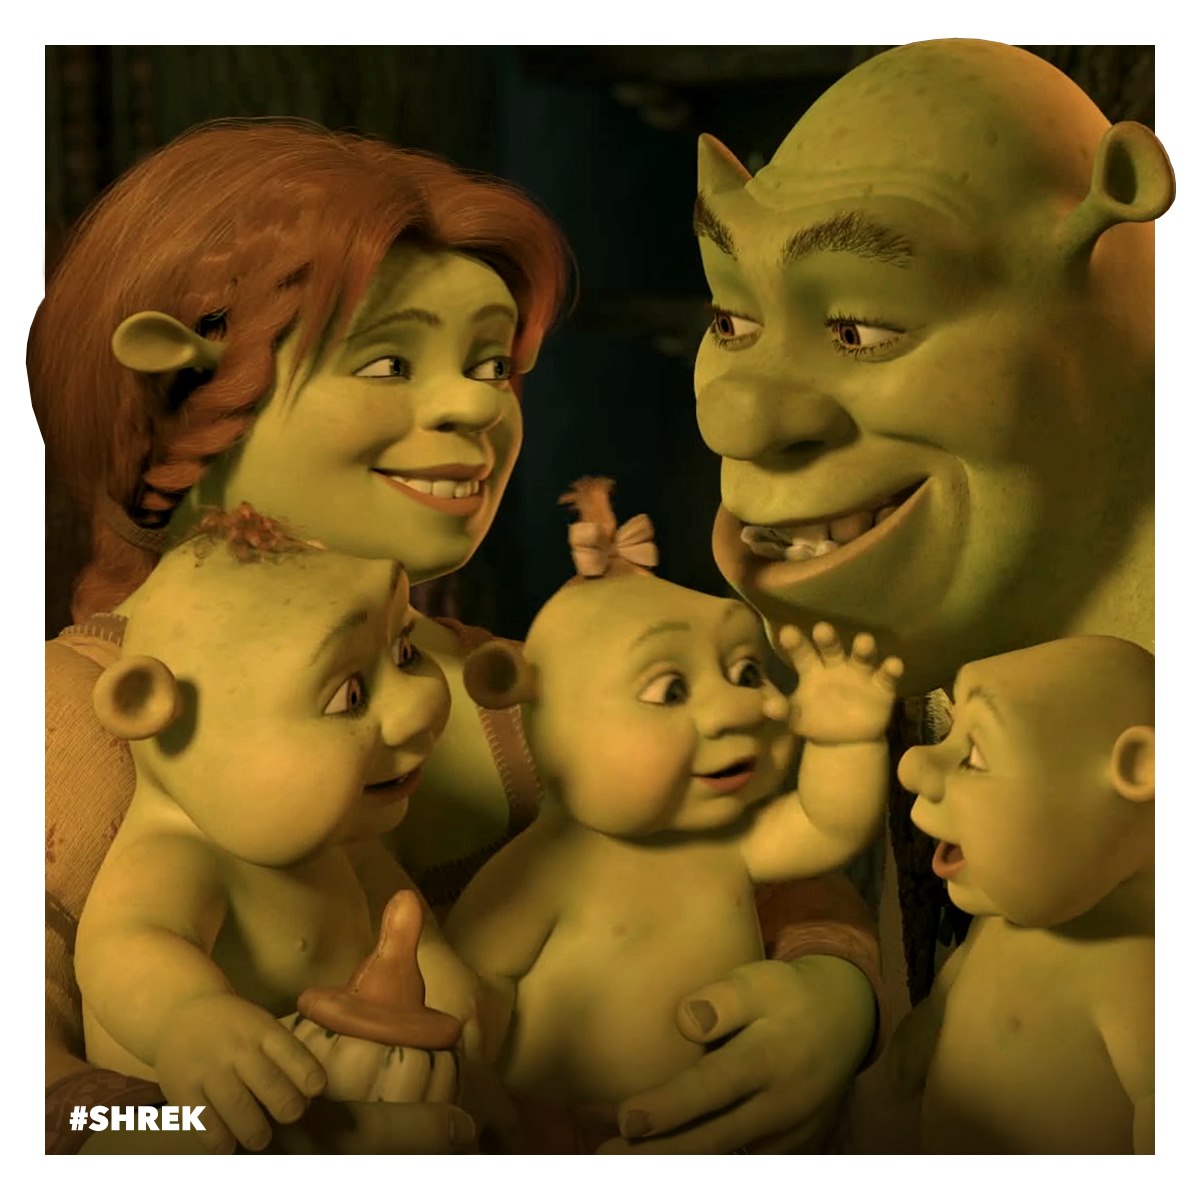 Shrek 5 is likely to start from scratch instead of picking up where Shrek 4 ended